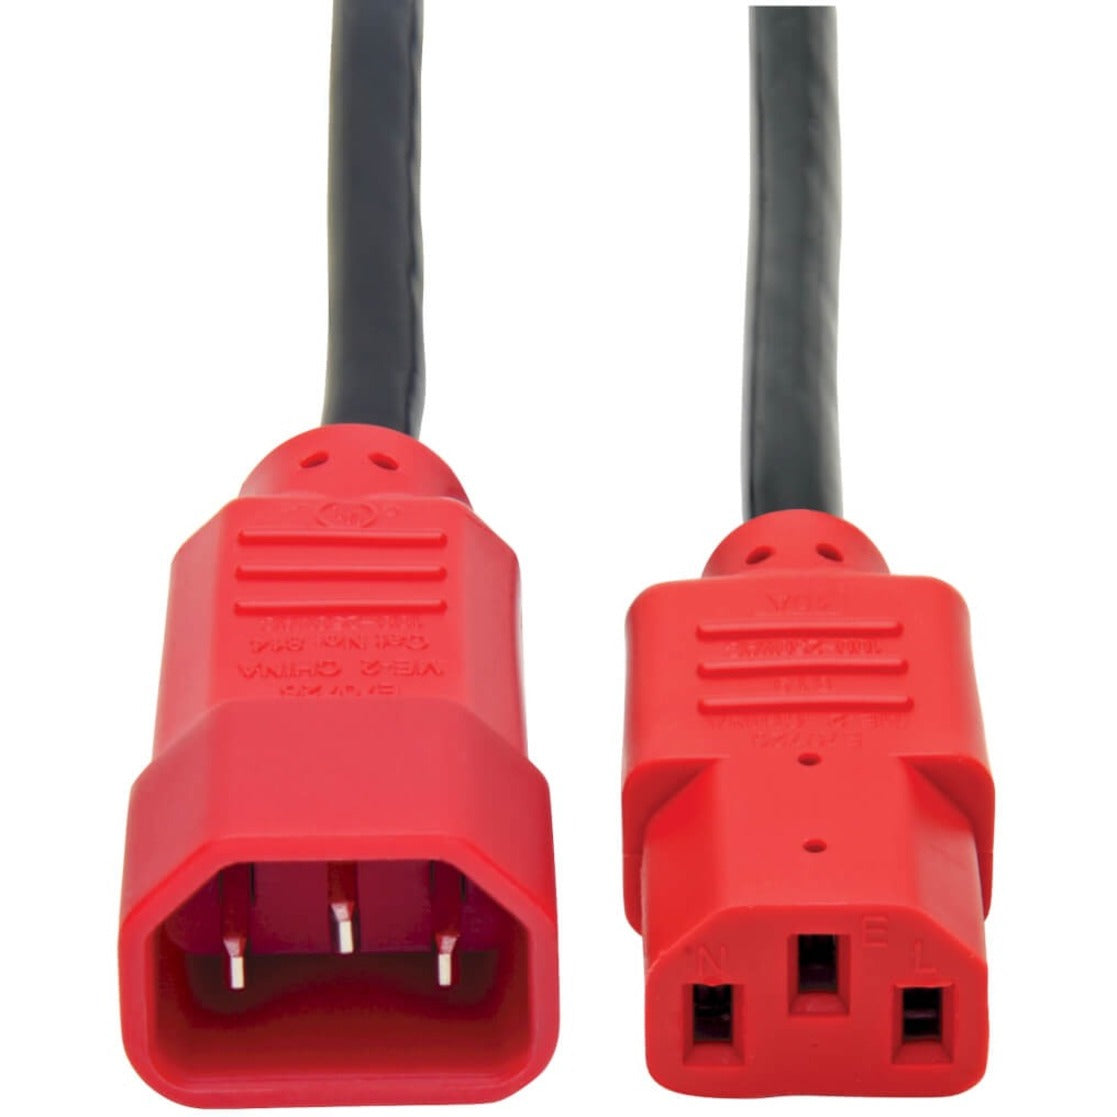 Tripp Lite P004-004-RD Power Interconnect Cord, 4 ft, Red